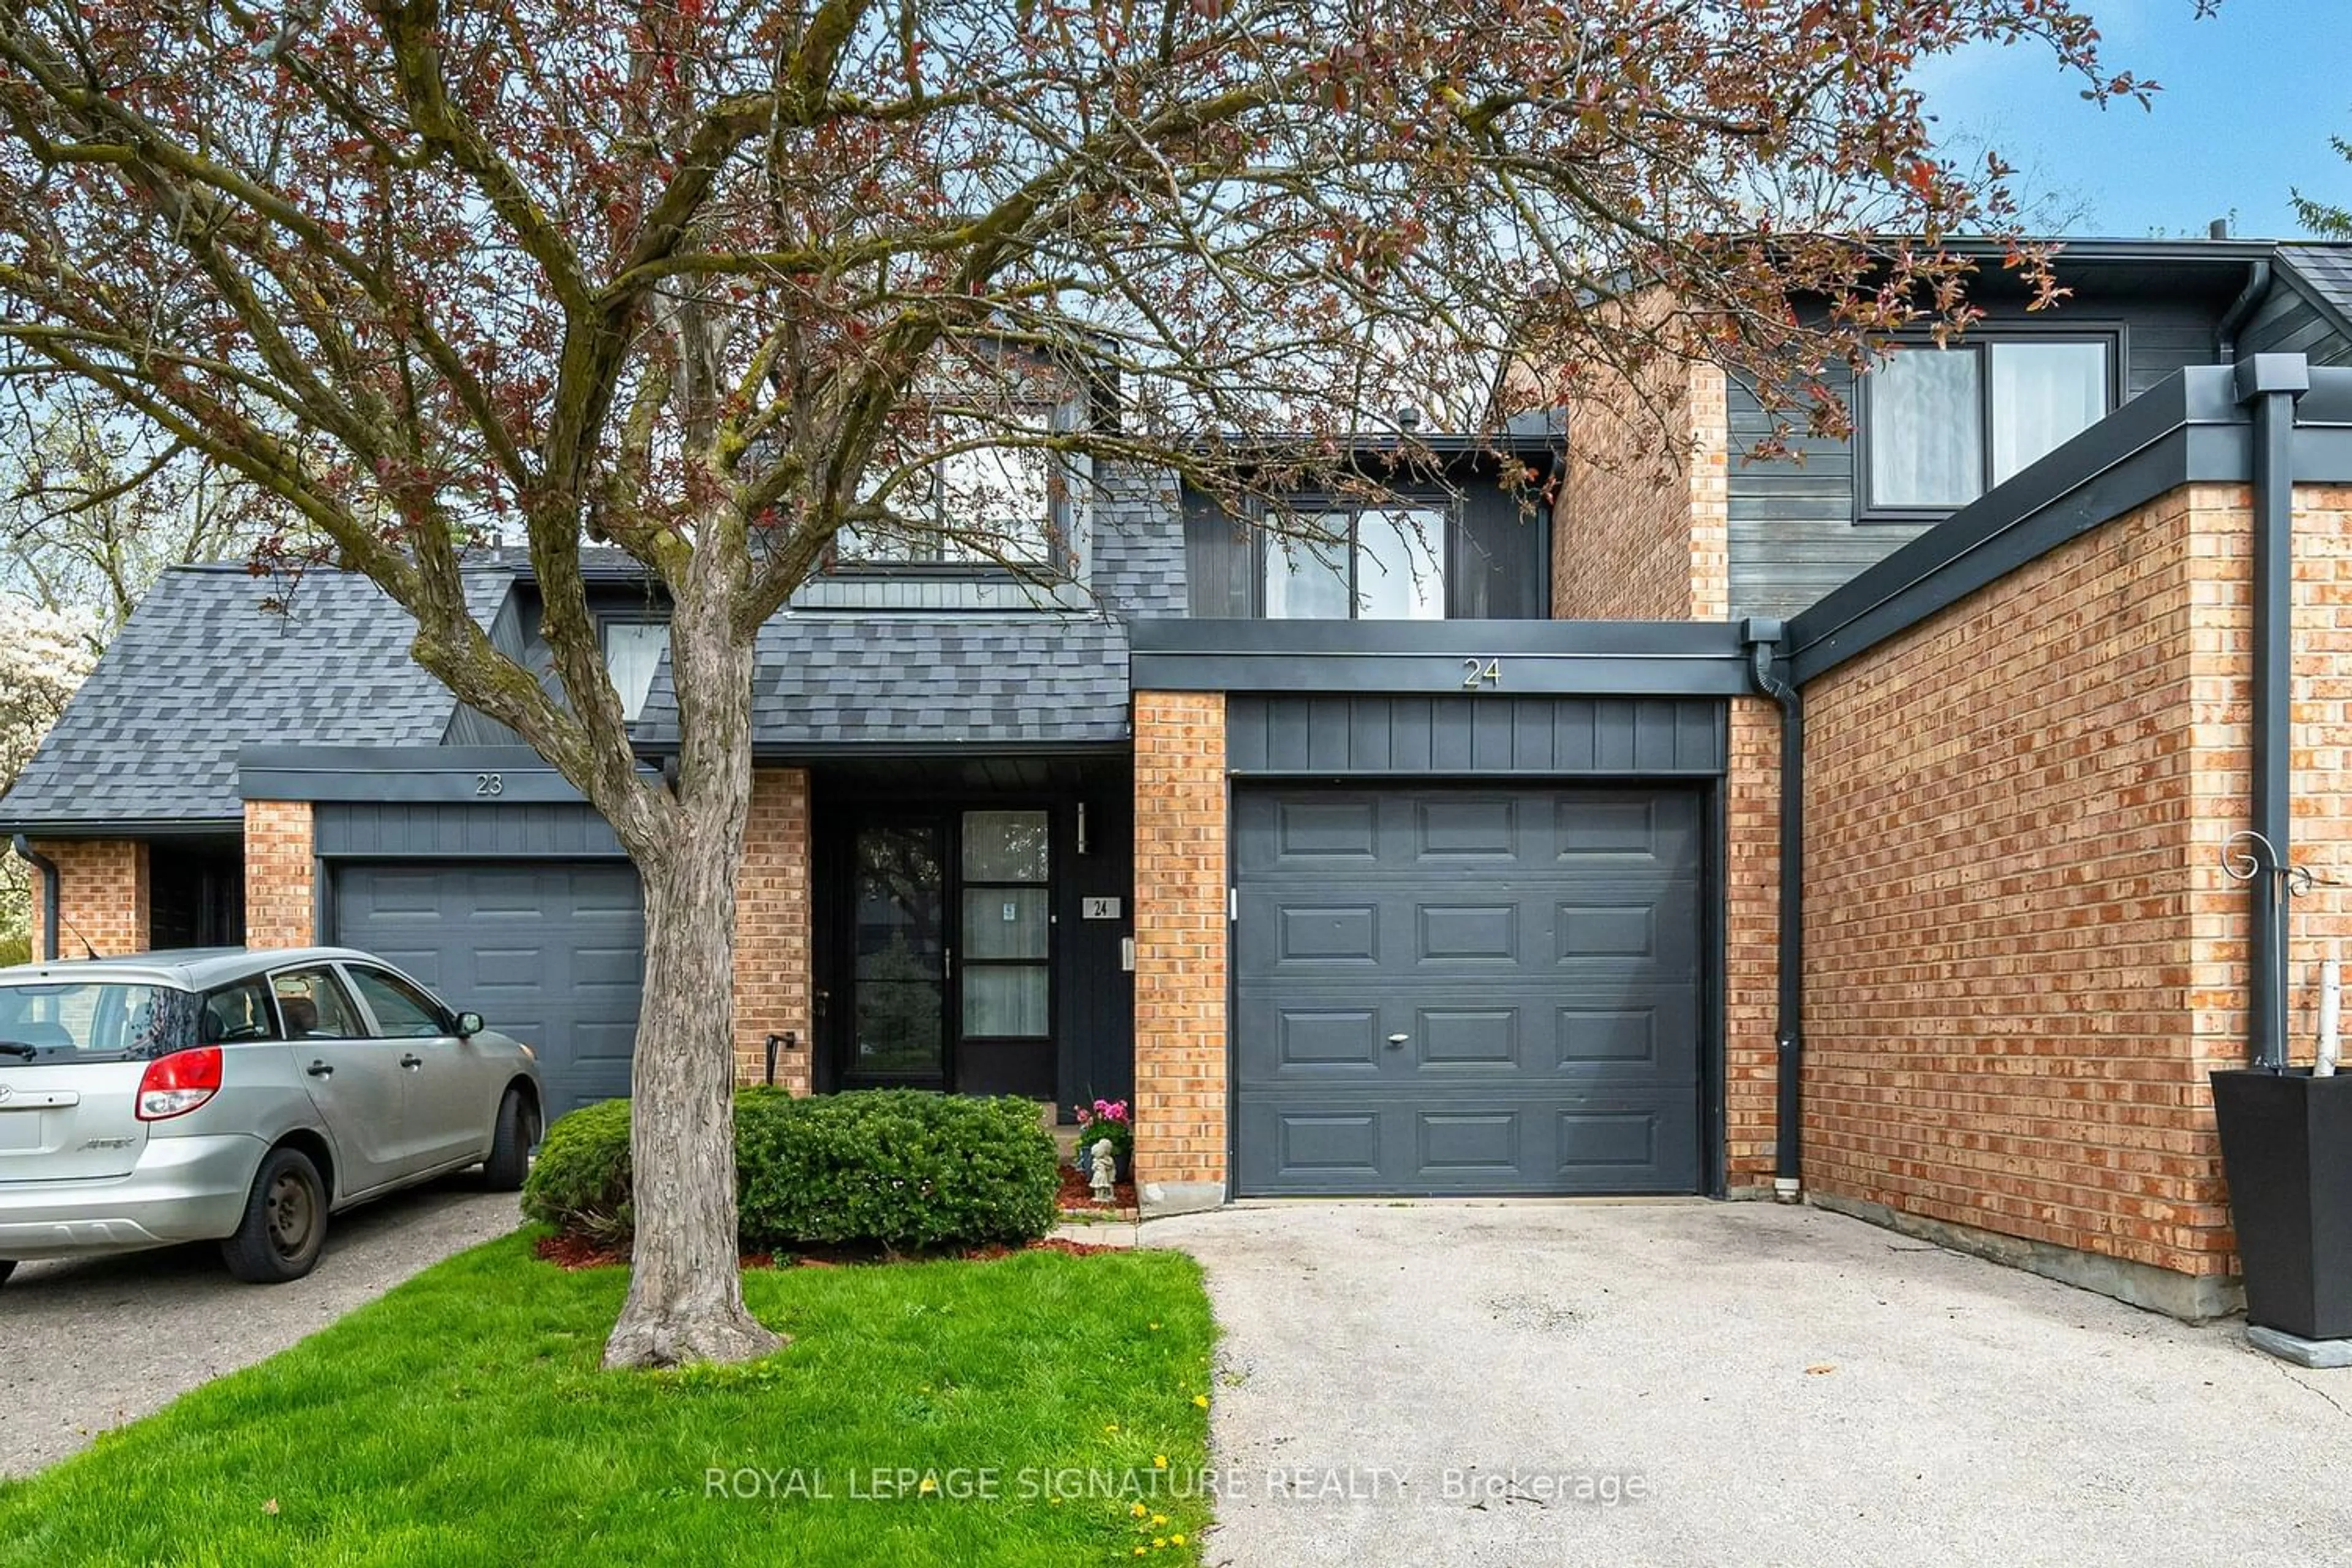 Home with brick exterior material for 20 Mineola Rd #24, Mississauga Ontario L5G 4N9